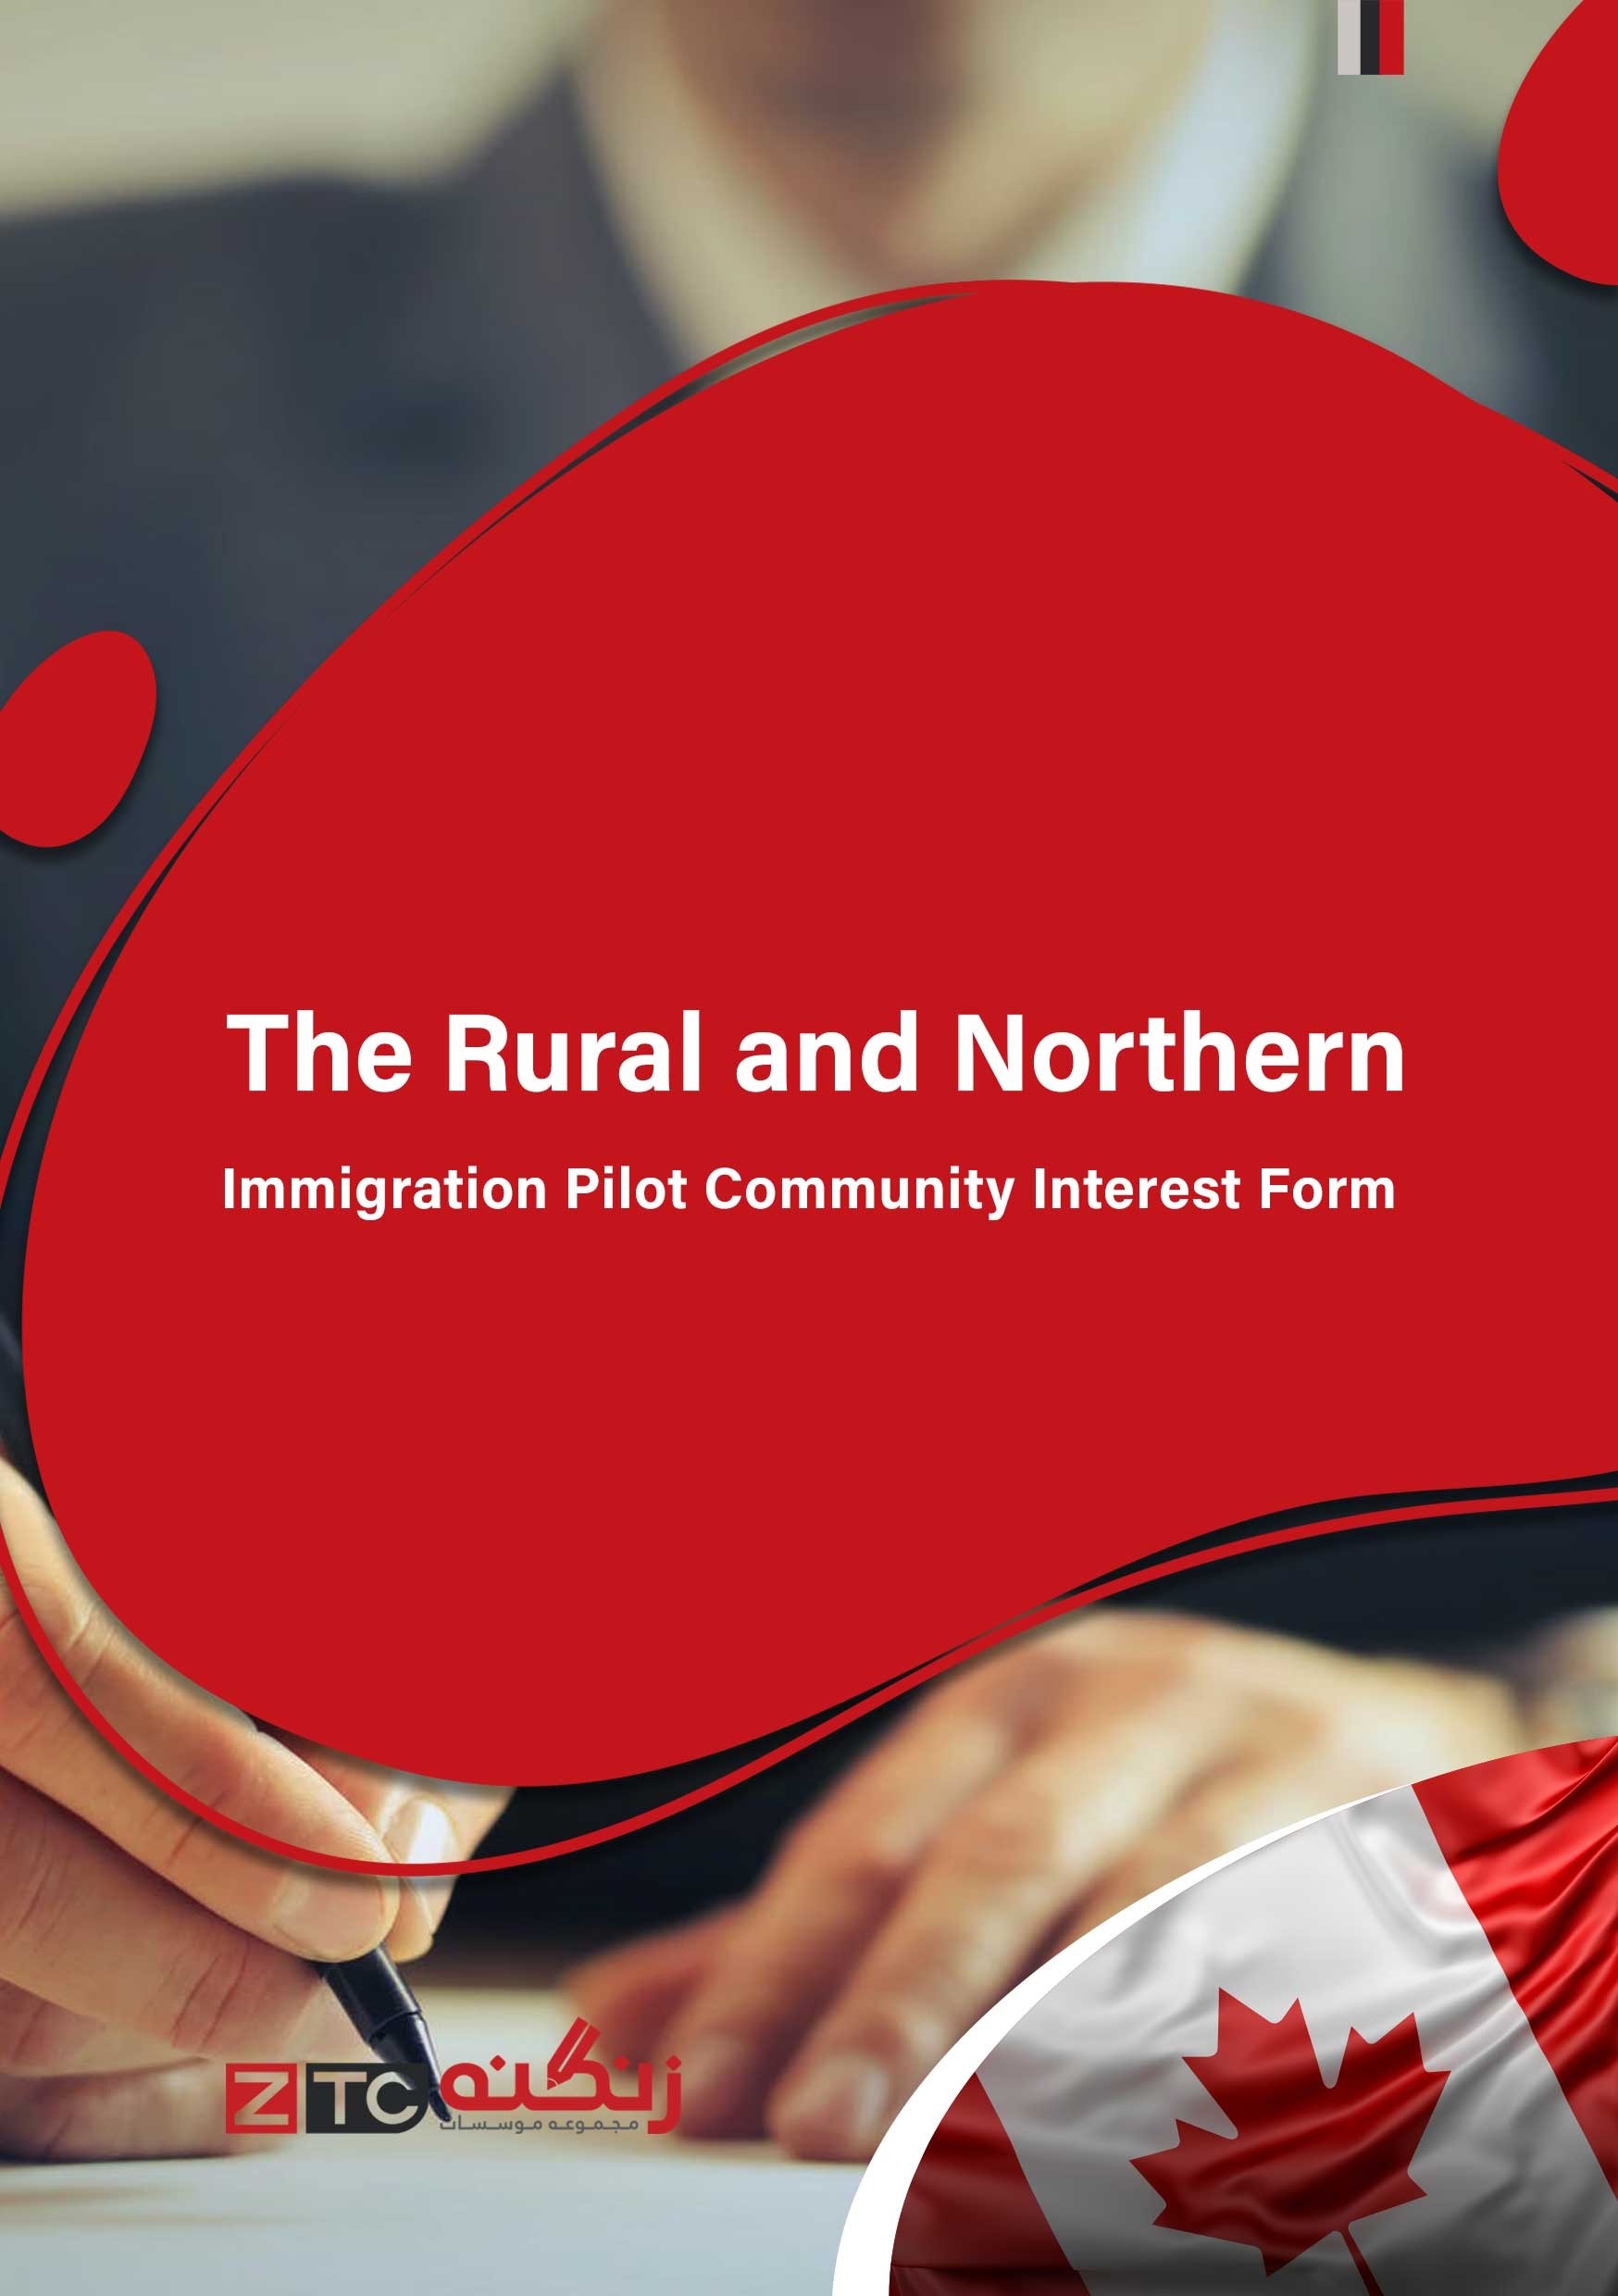 The Rural and Northern Immigration Pilot Community Interest Form